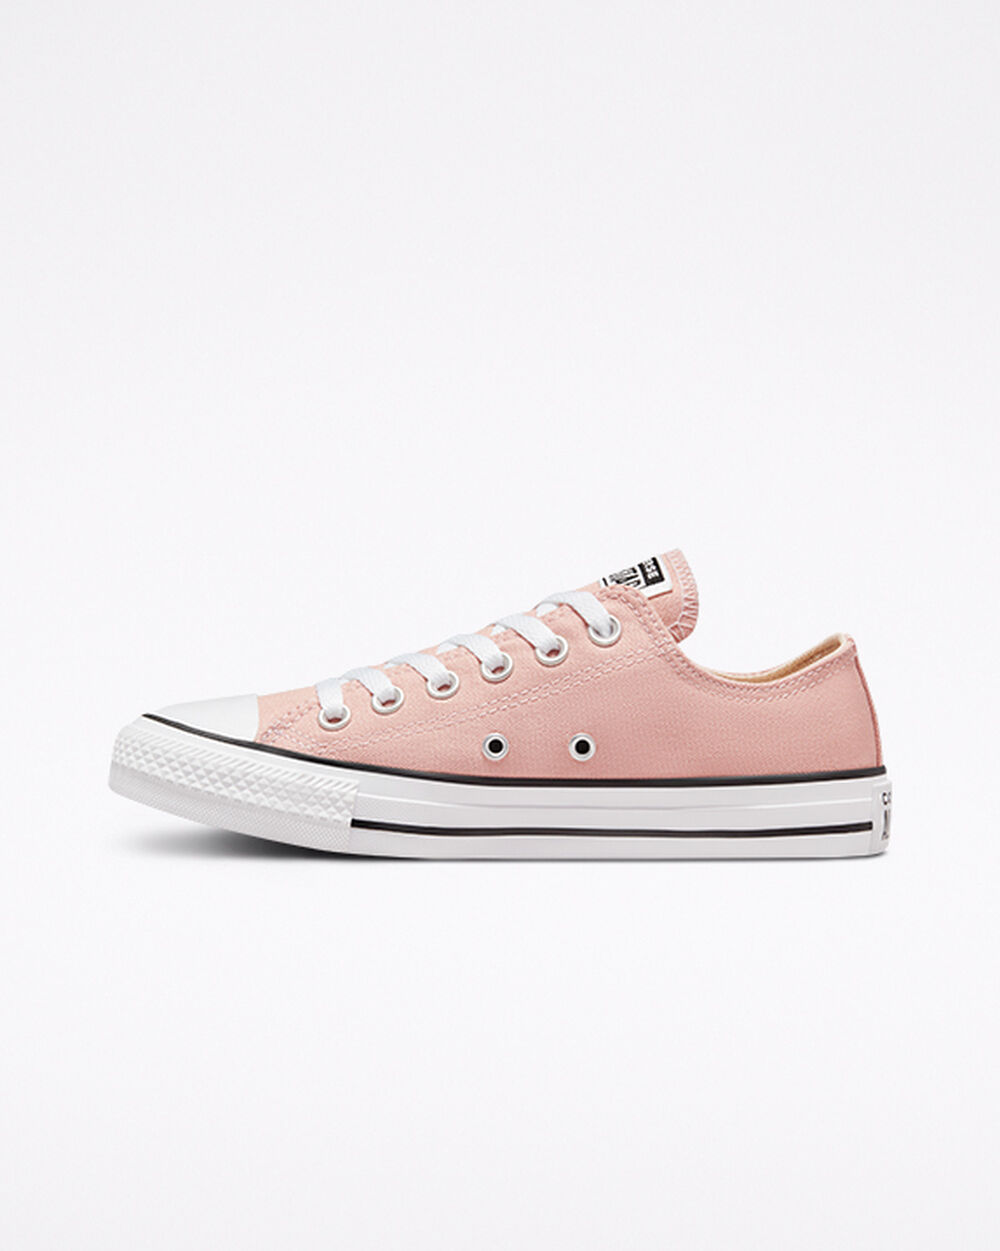 Tenis Converse Chuck Taylor All Star Mujer Rosas | Mexico-566416